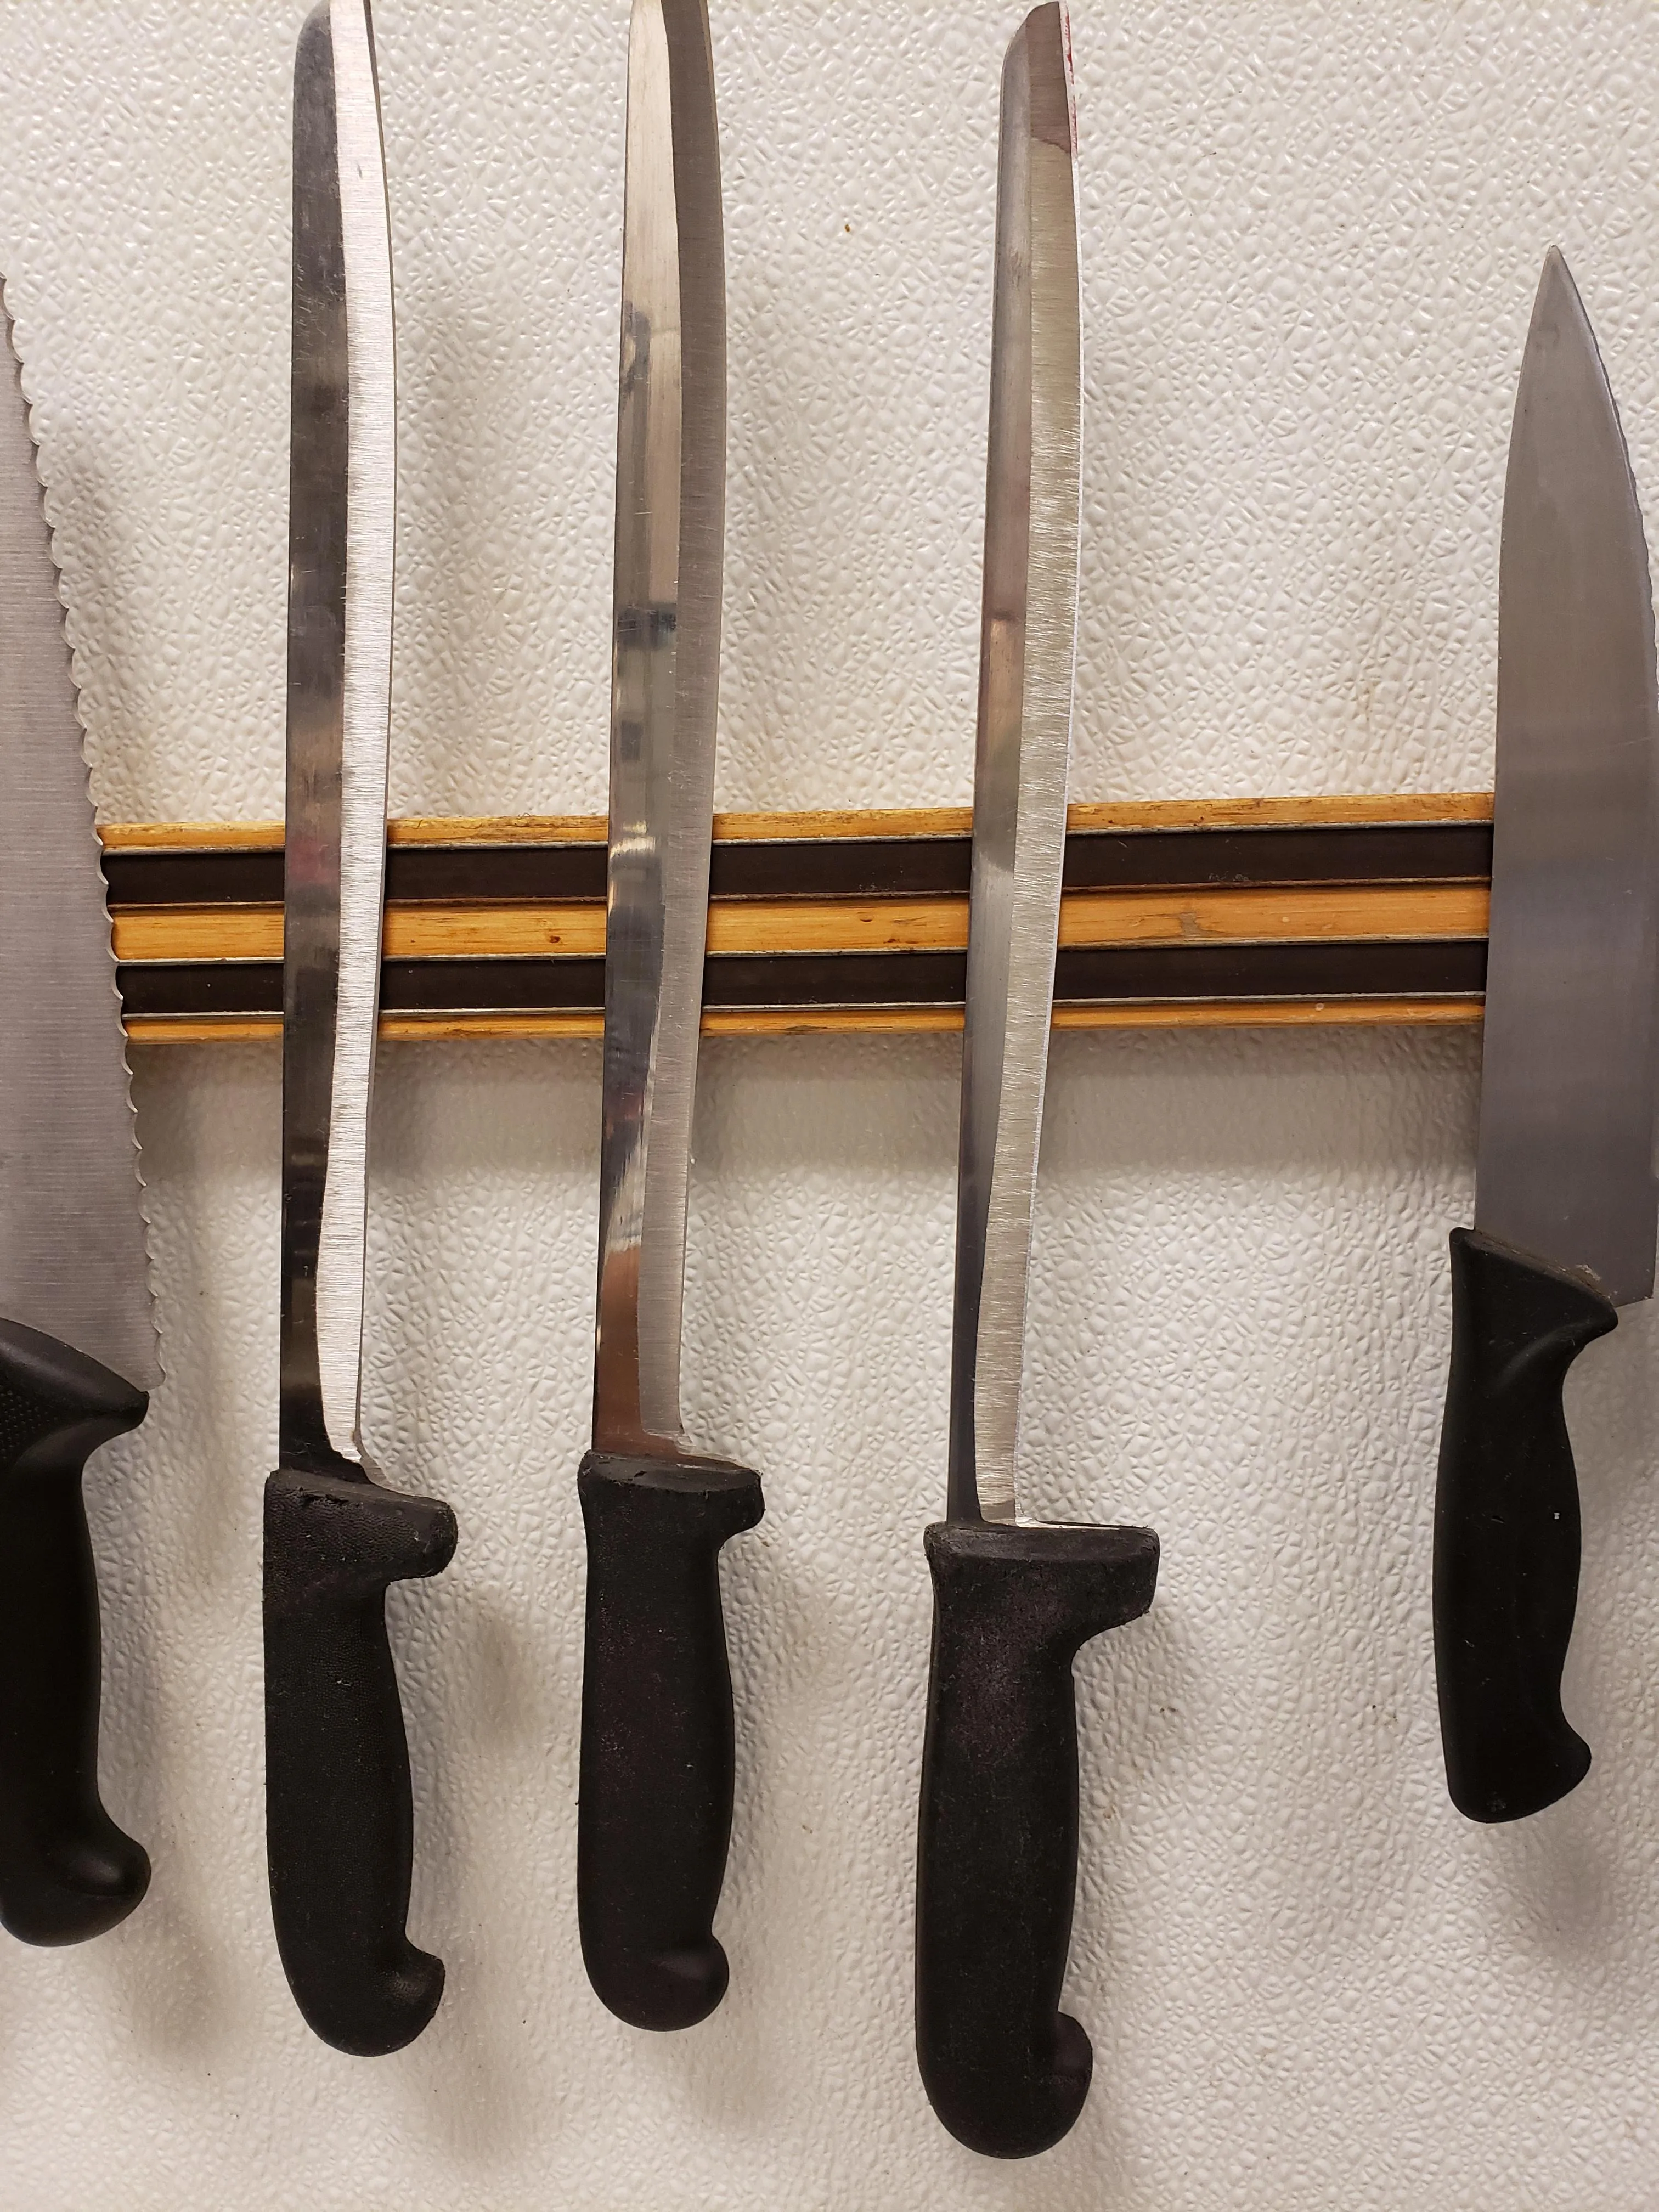 Well worn knives.